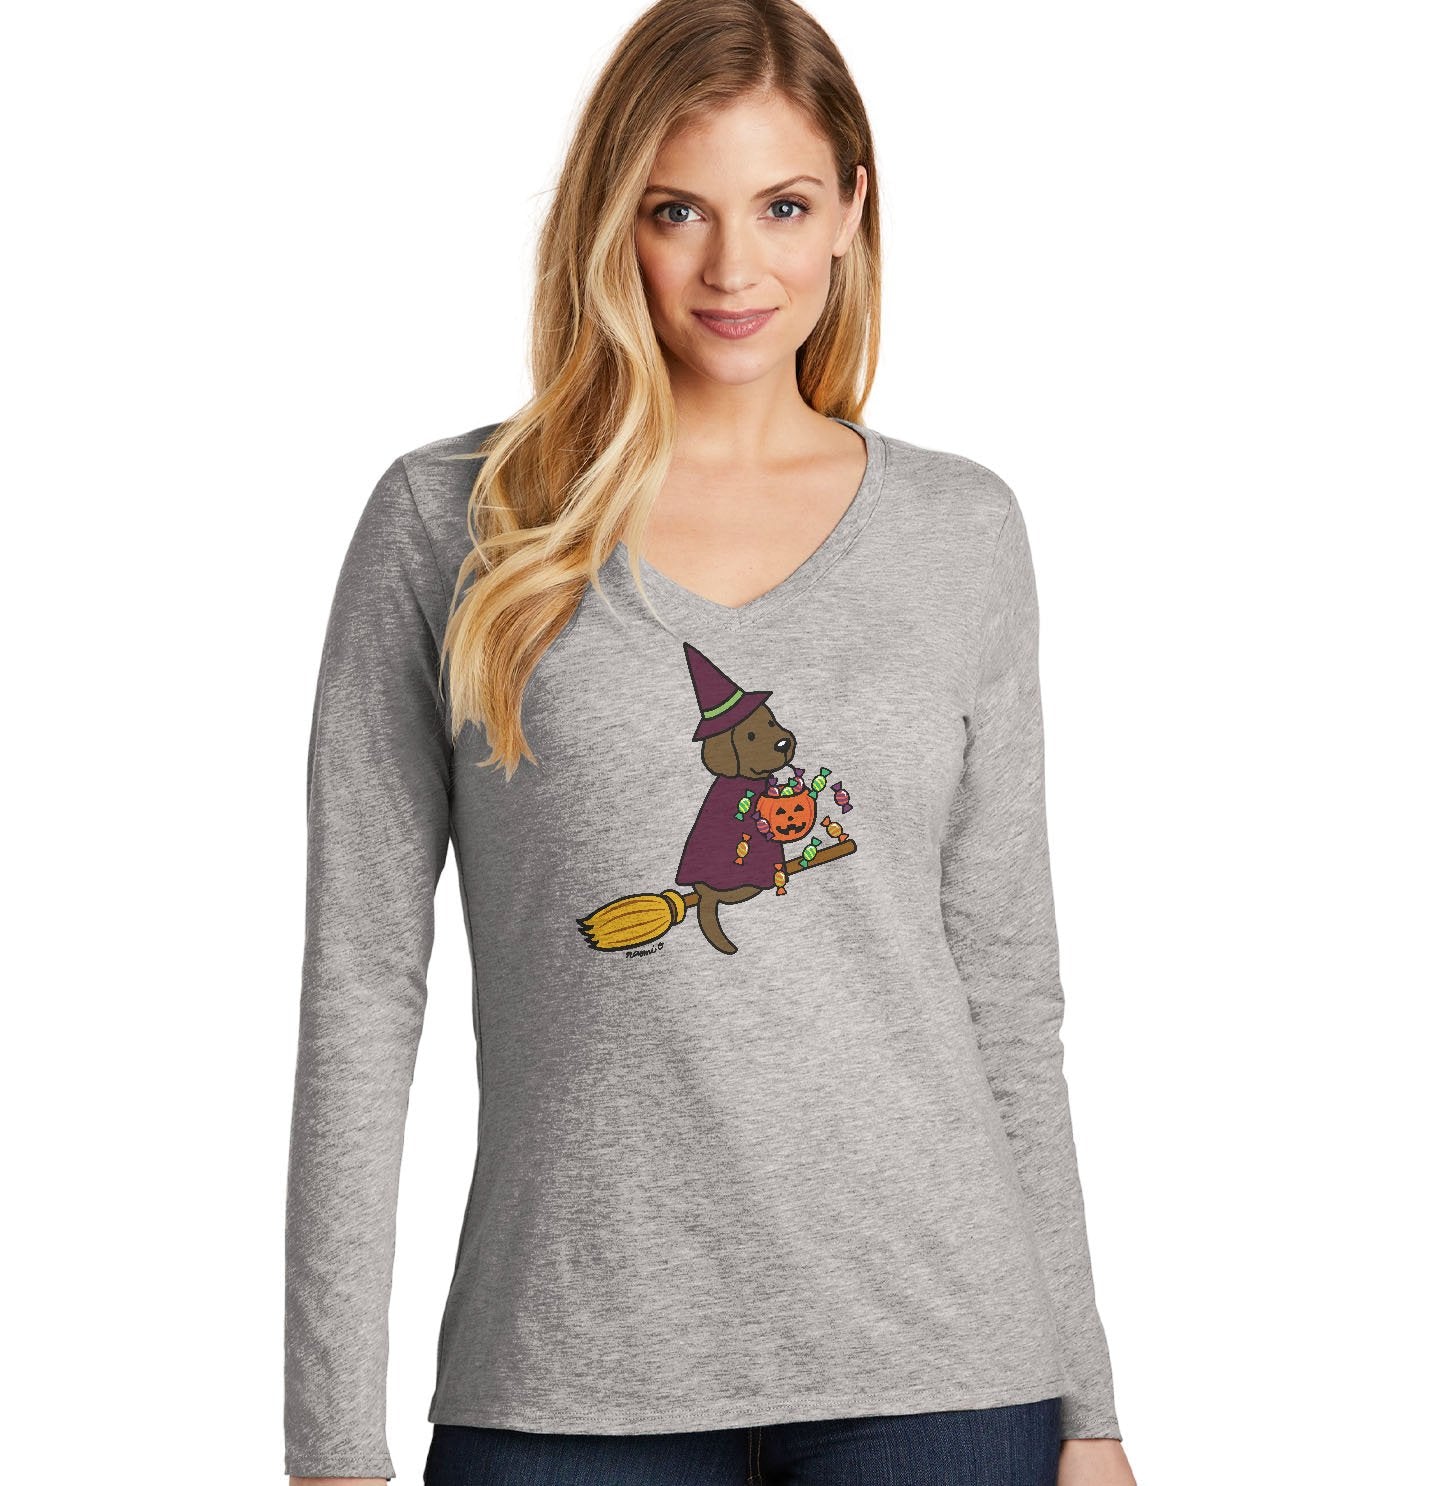 Chocolate Lab Witch - Women's V-Neck Long Sleeve T-Shirt